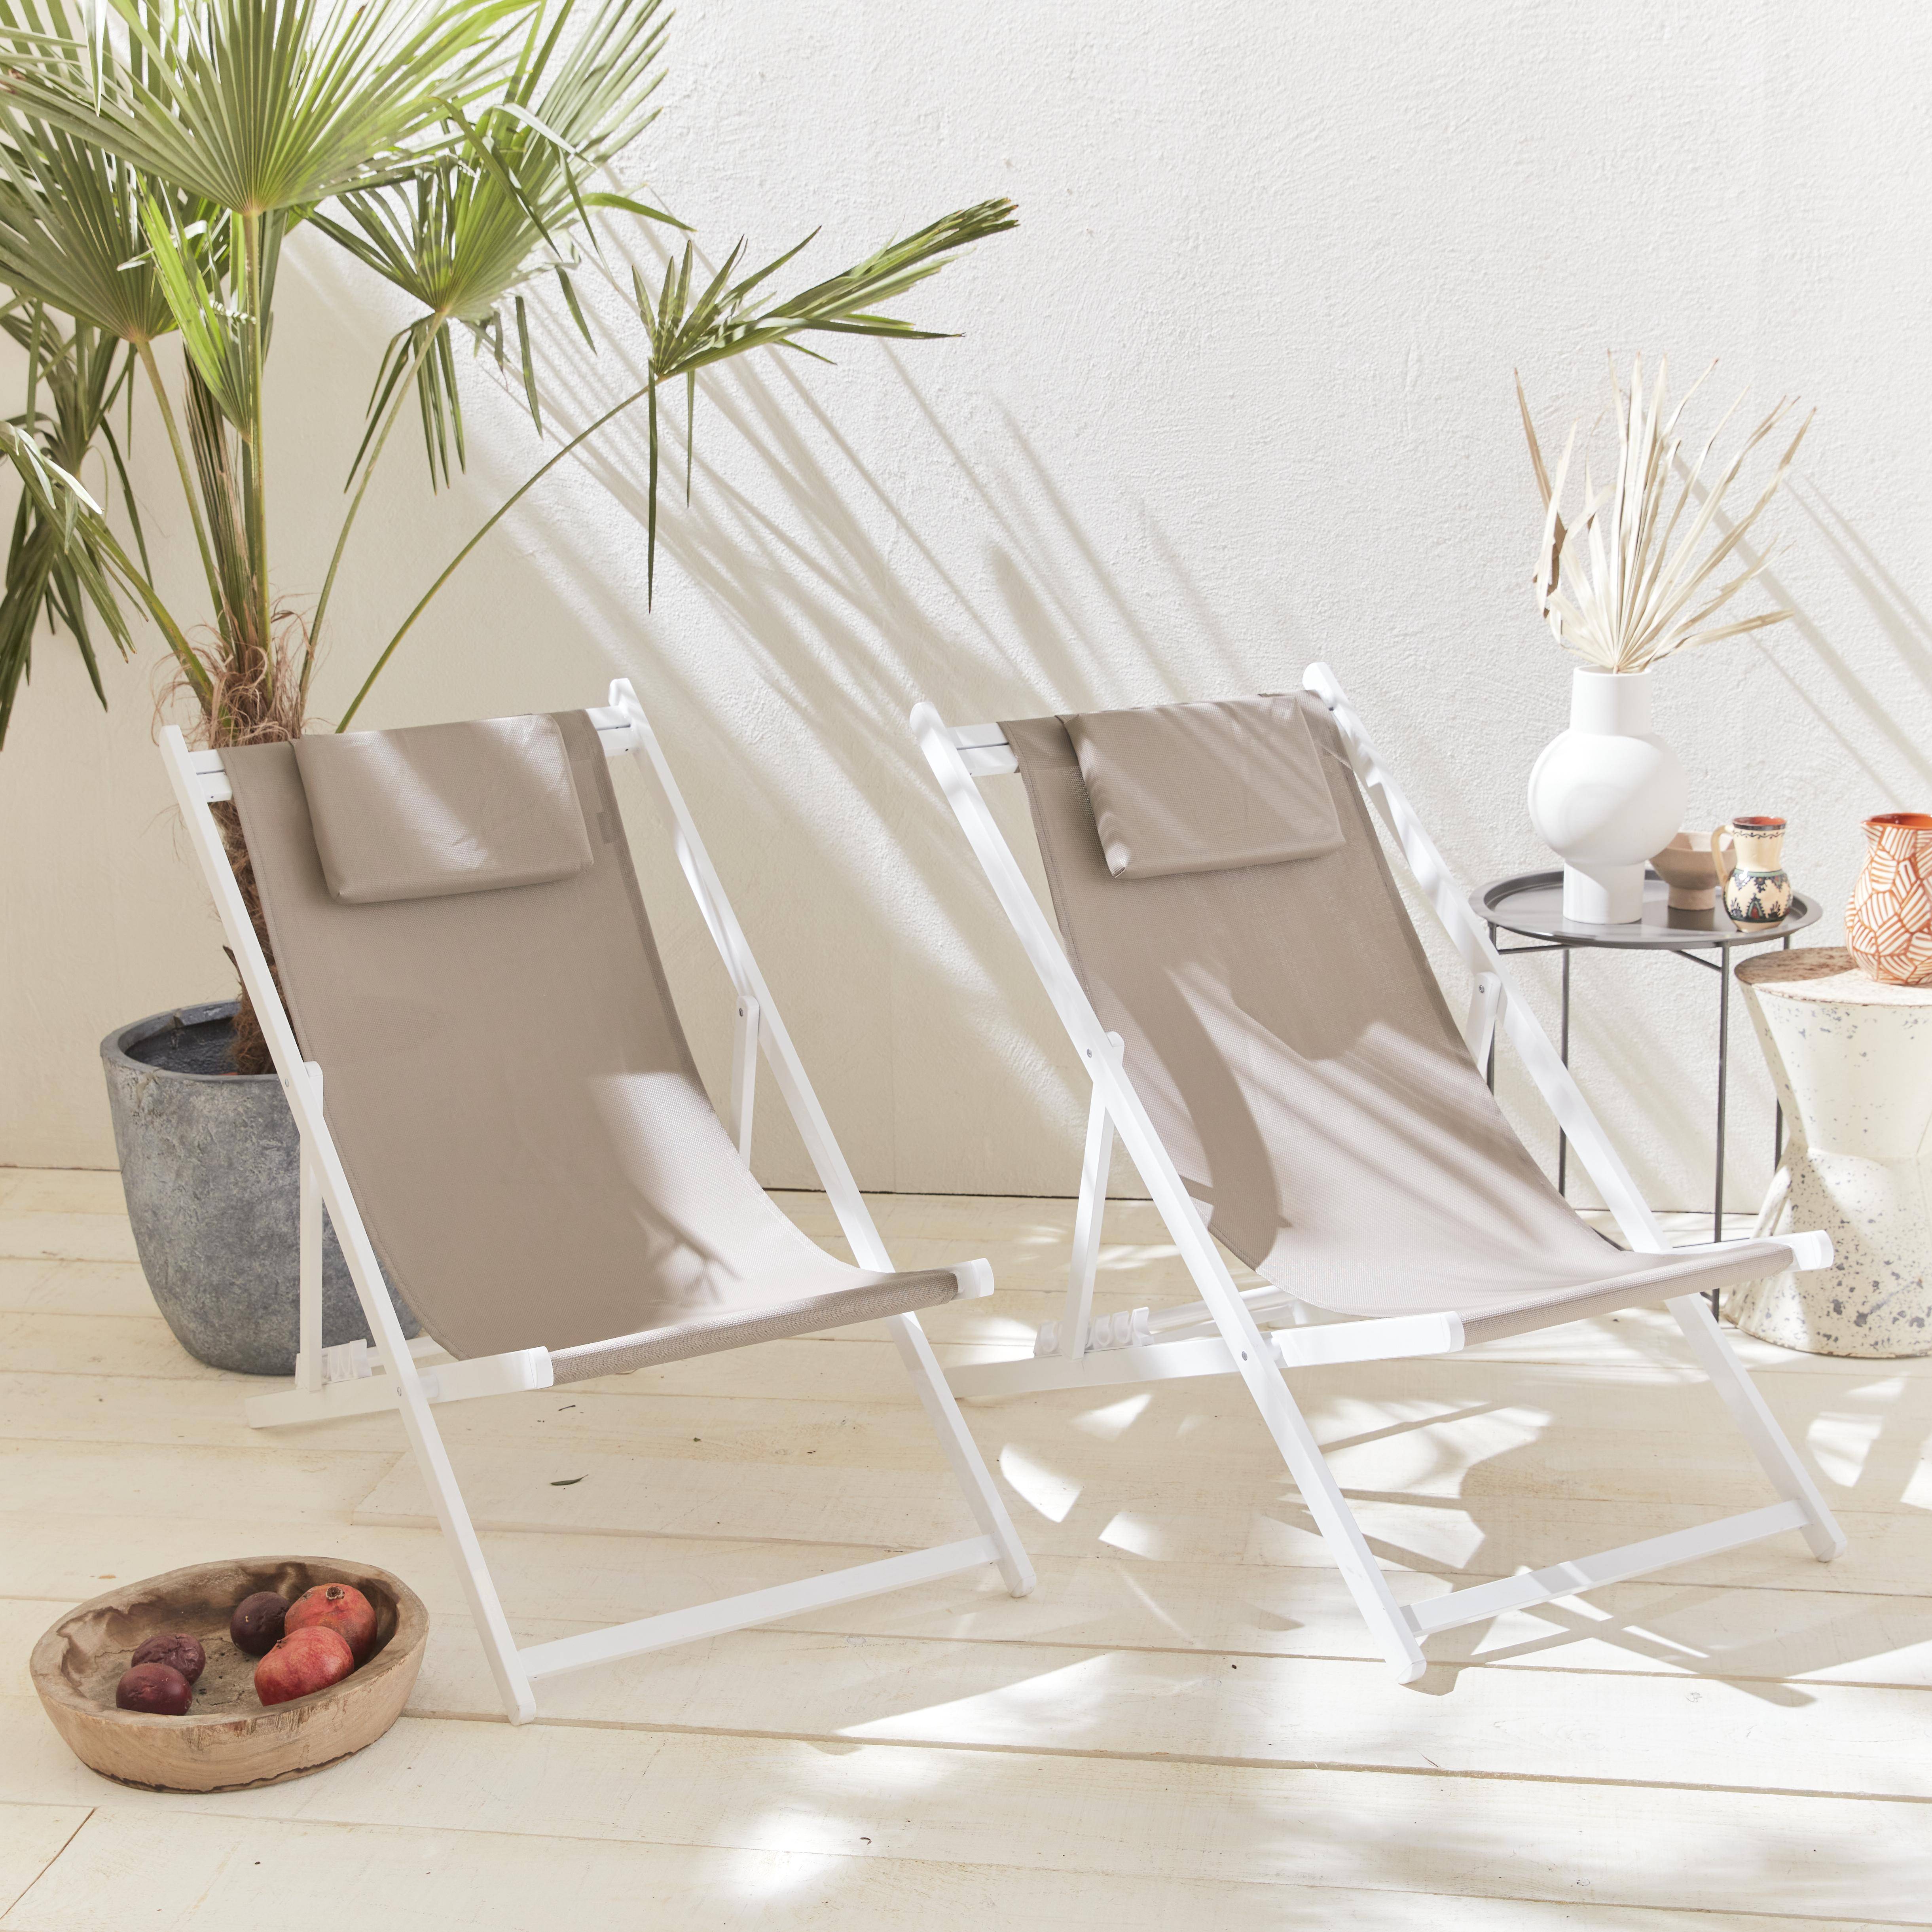 Set of 2 sun loungers - adjustable deck chairs with headrests made from aluminium frame - Gaia - White frame, Brown textilene,sweeek,Photo1